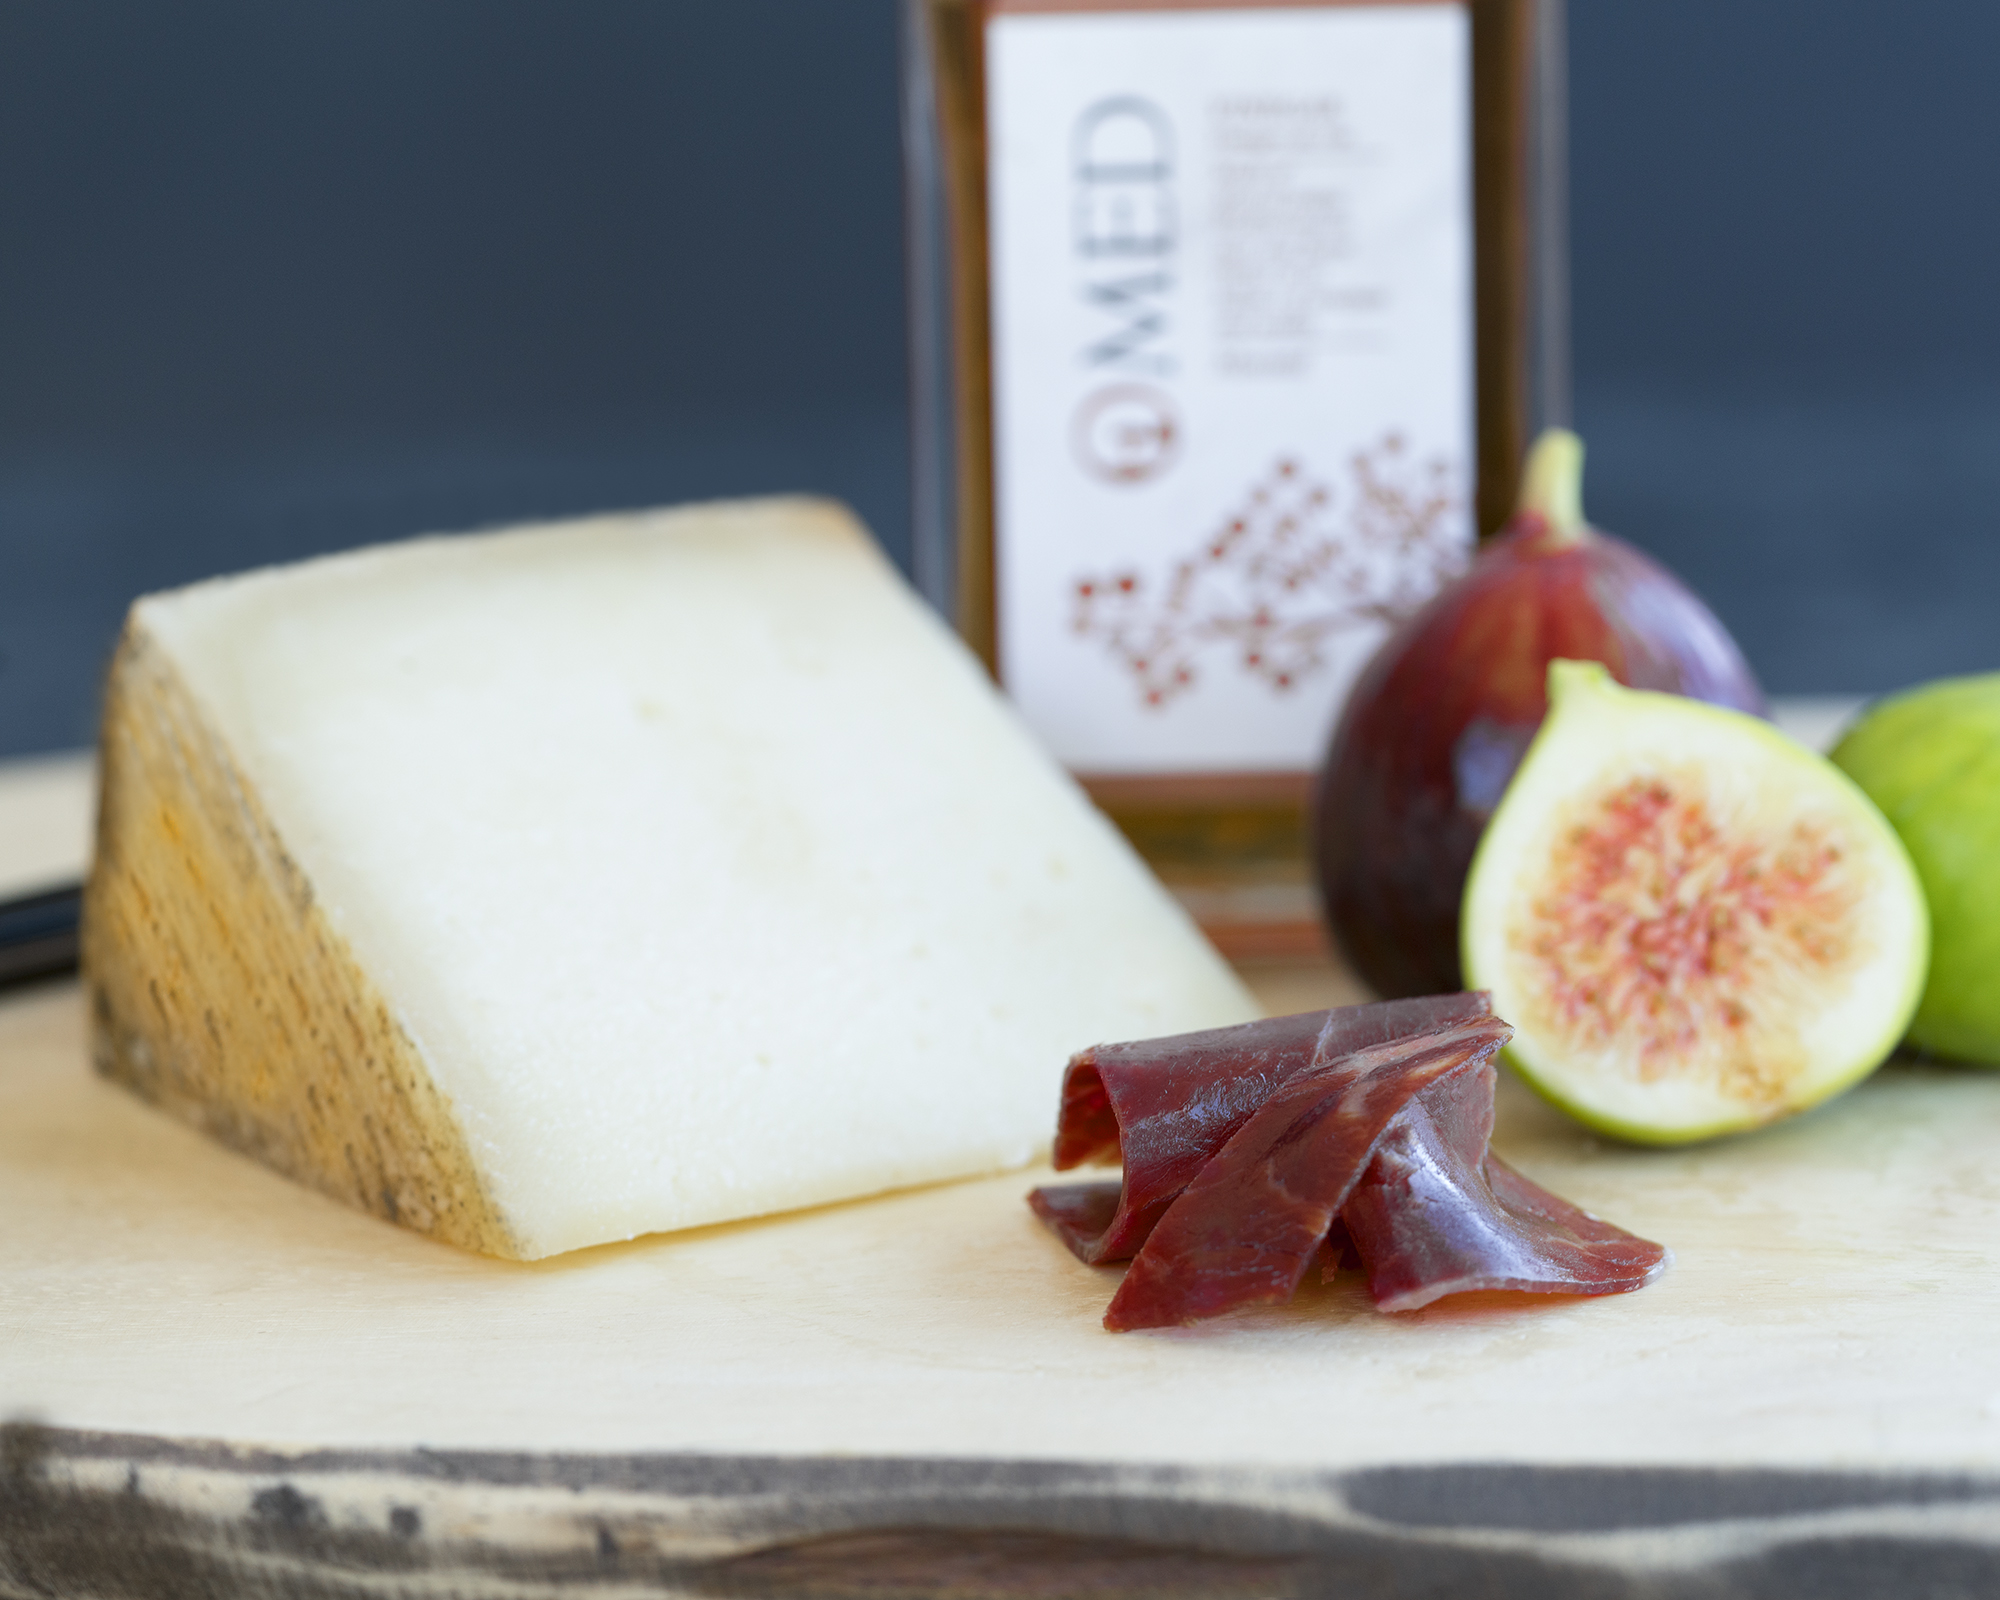 Figs Manchego Cheese Ramón Ibérico Salad Ingredients Pictured on Cutting Board